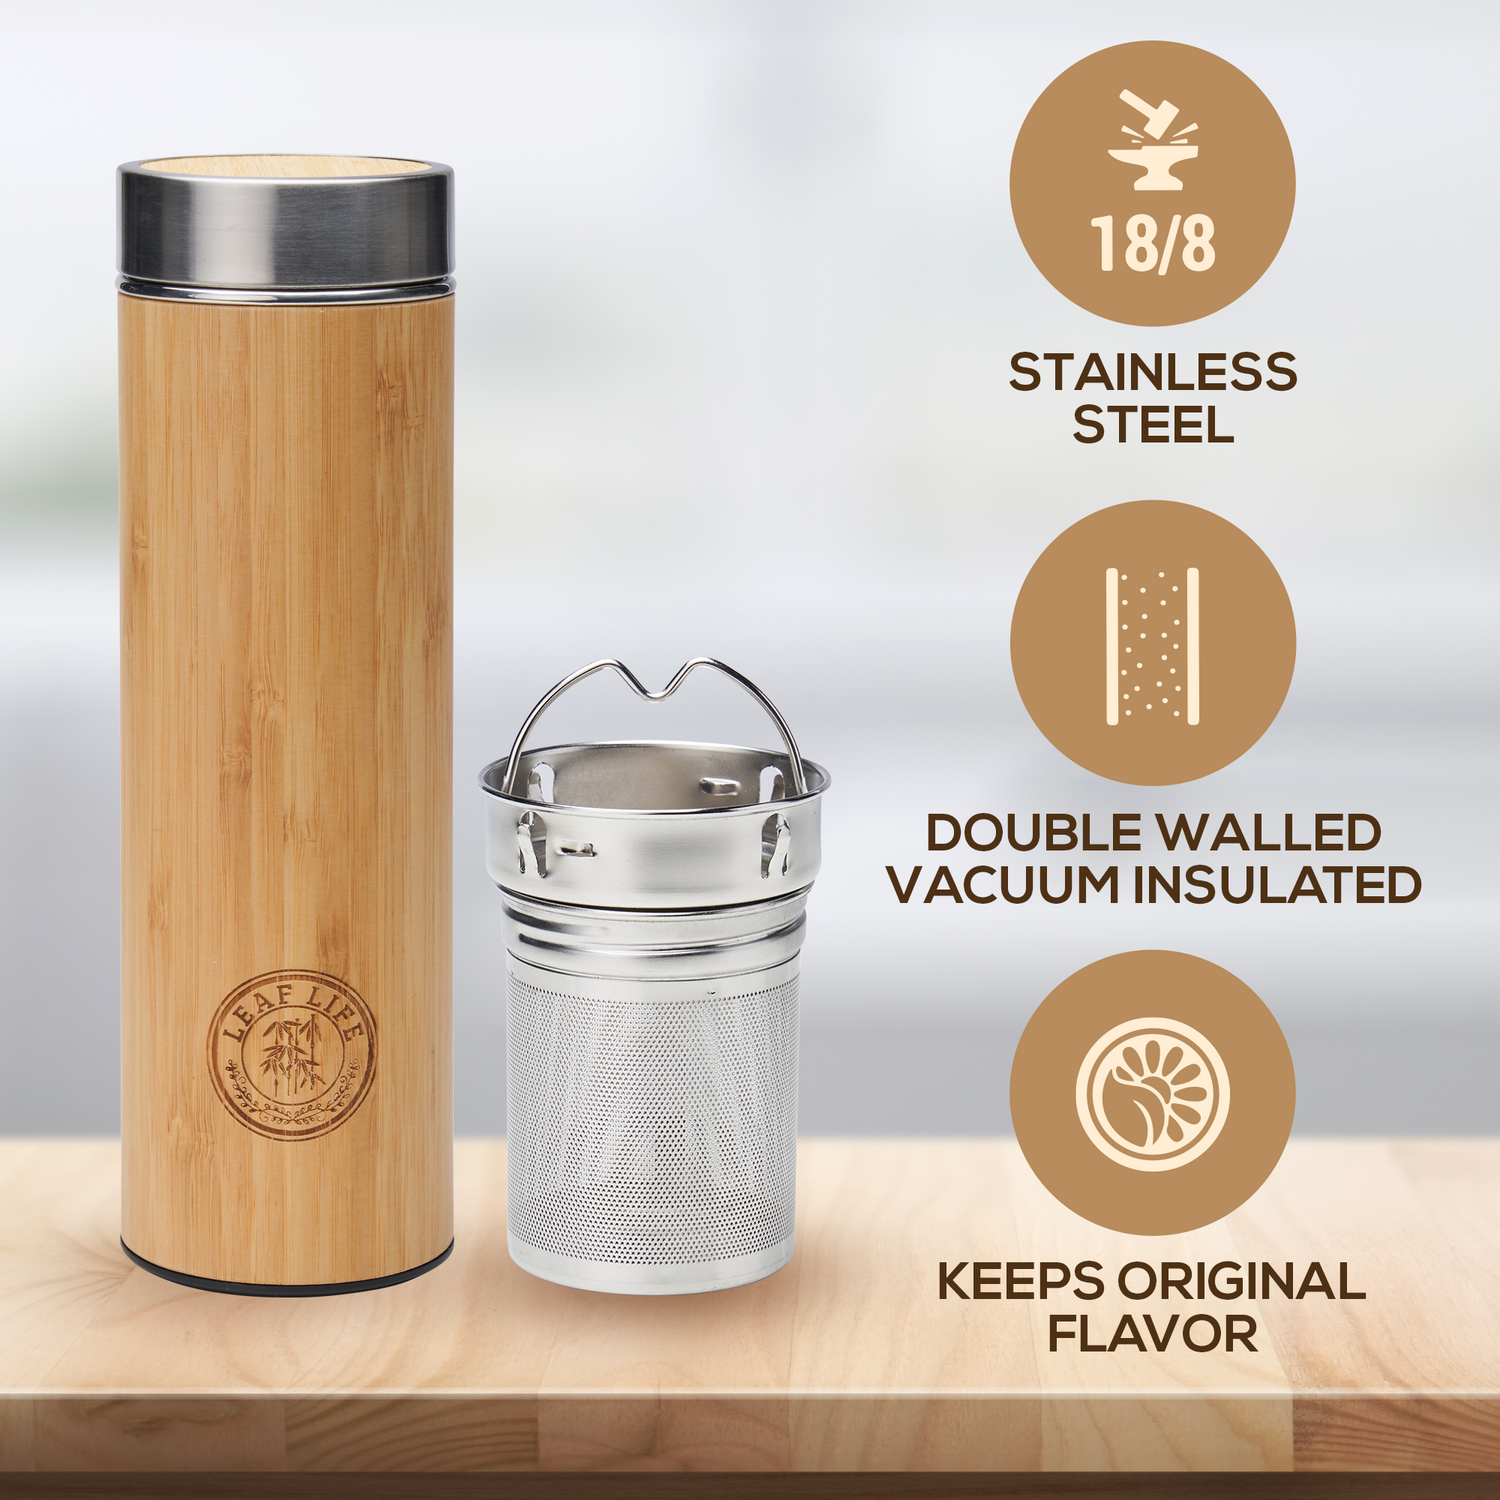 Bamboo Tumbler with Tea Infuser & Strainer by LeafLife